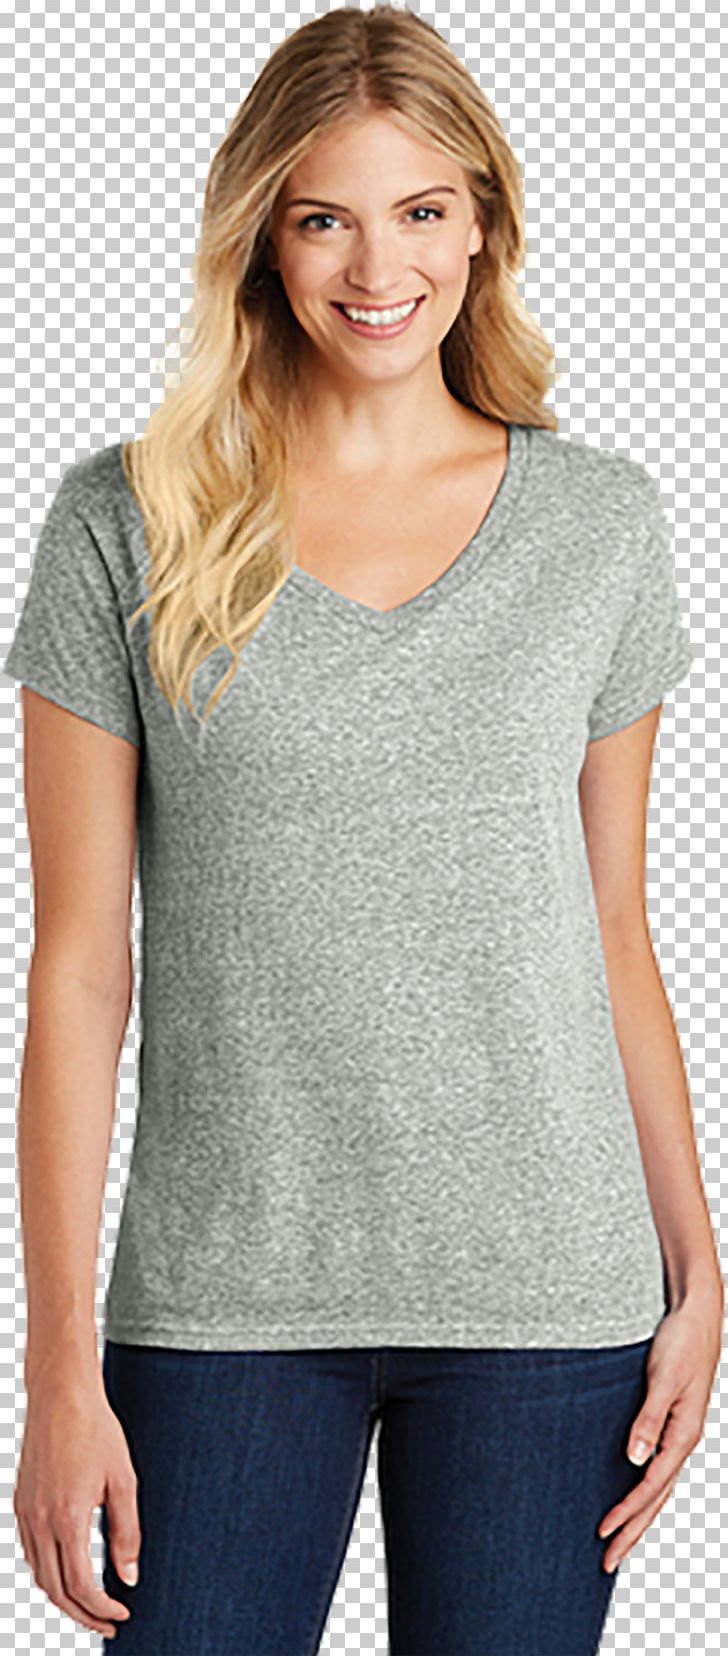 T-shirt Sleeve Neckline Clothing PNG, Clipart, Blouse, Cardigan, Clothing, Day Dress, Dolman Free PNG Download